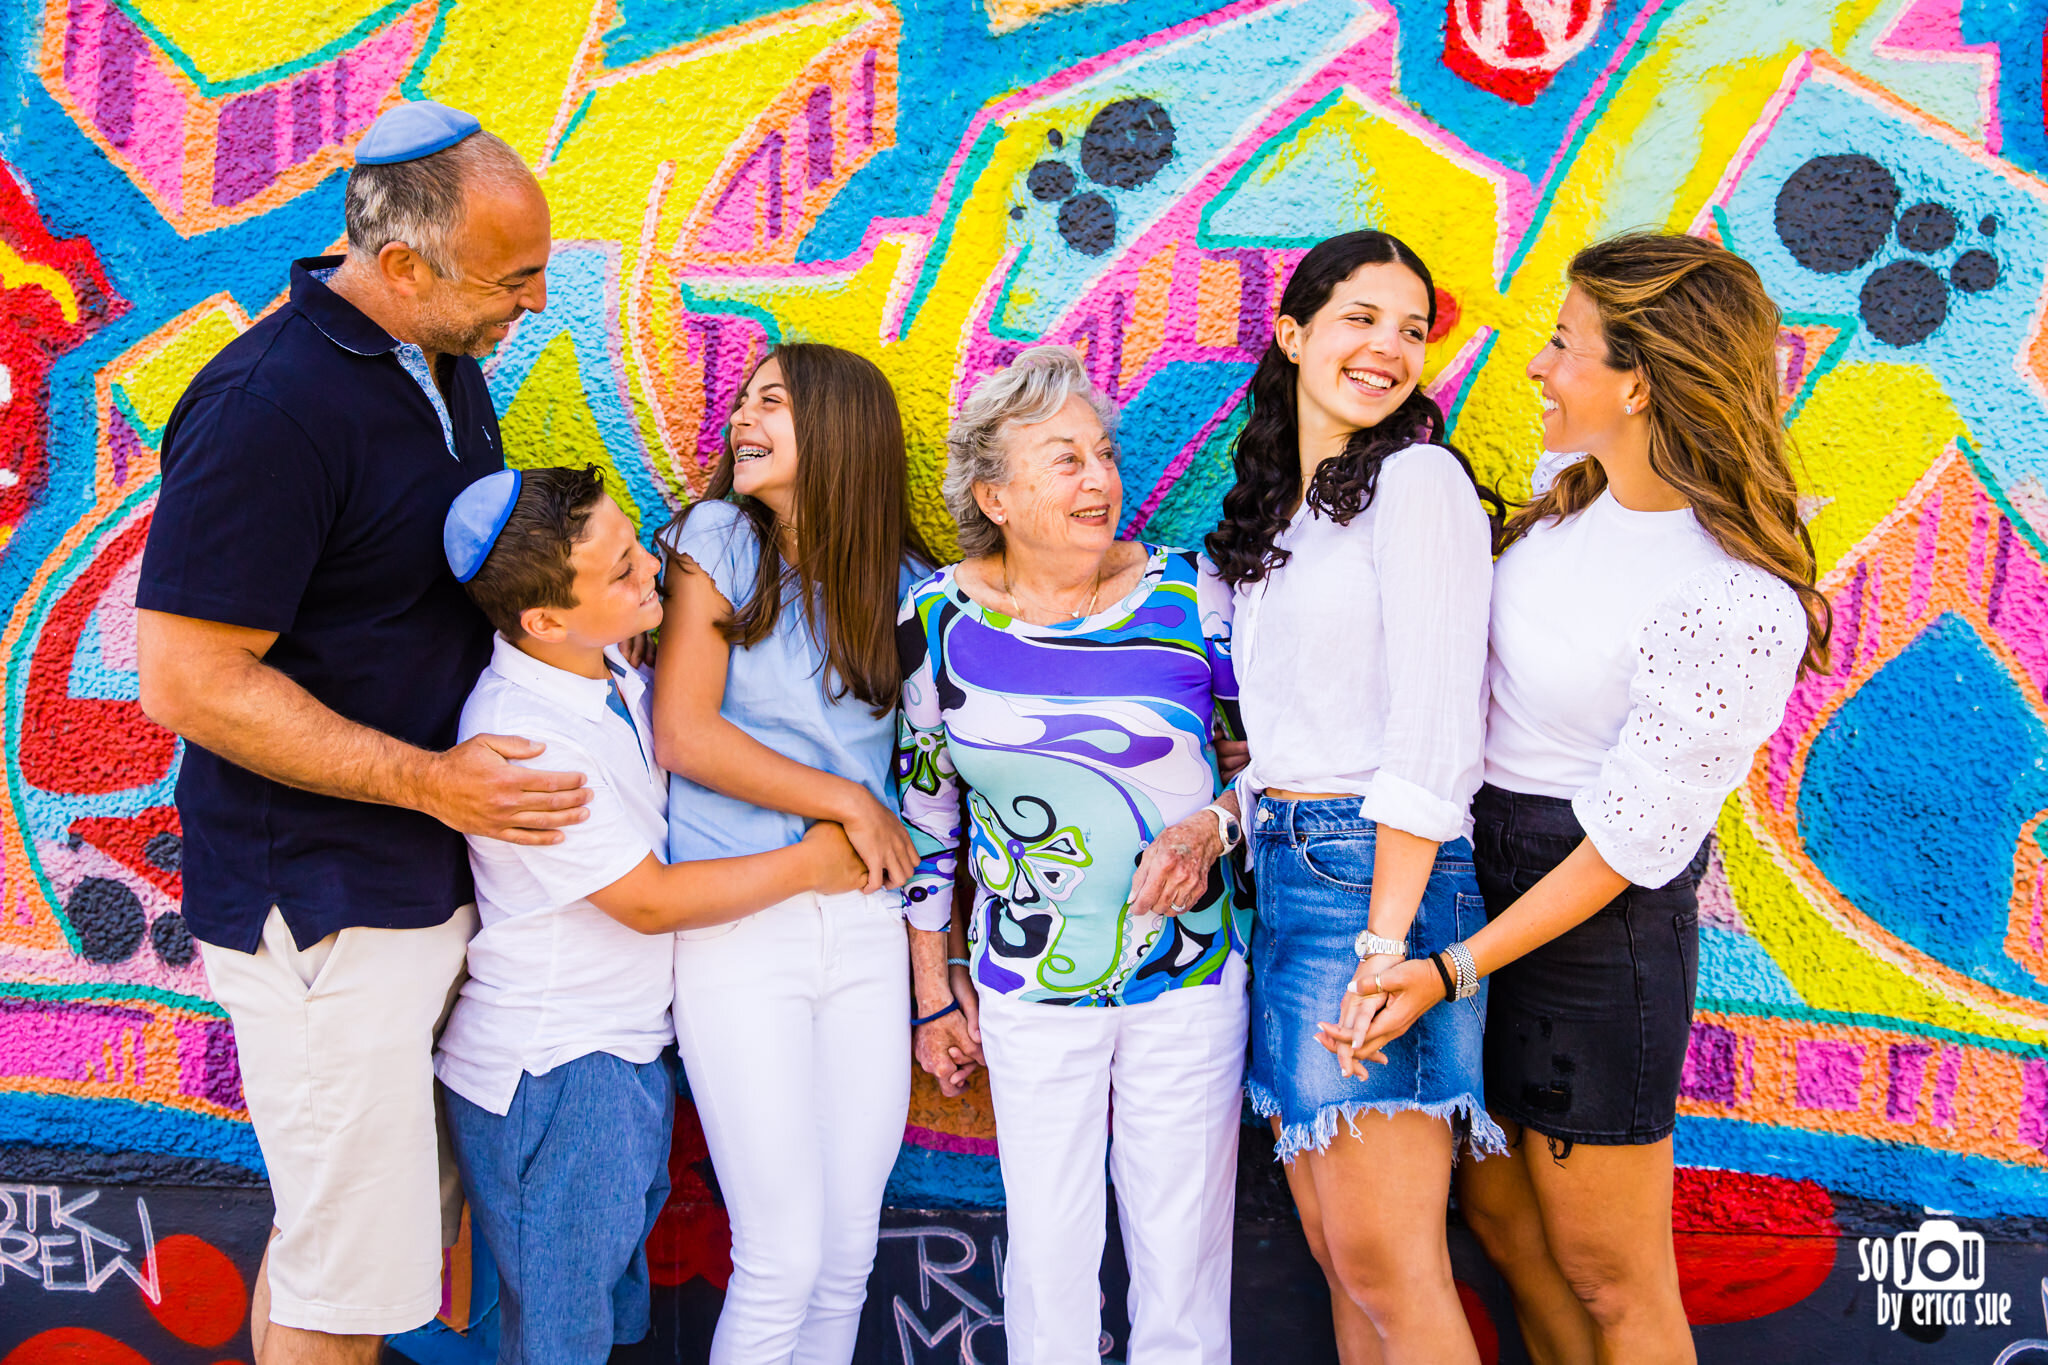 4-so-you-by-erica-sue-extended-family-session-wynwood-lifestyle-photographer-CD8A6962.jpg